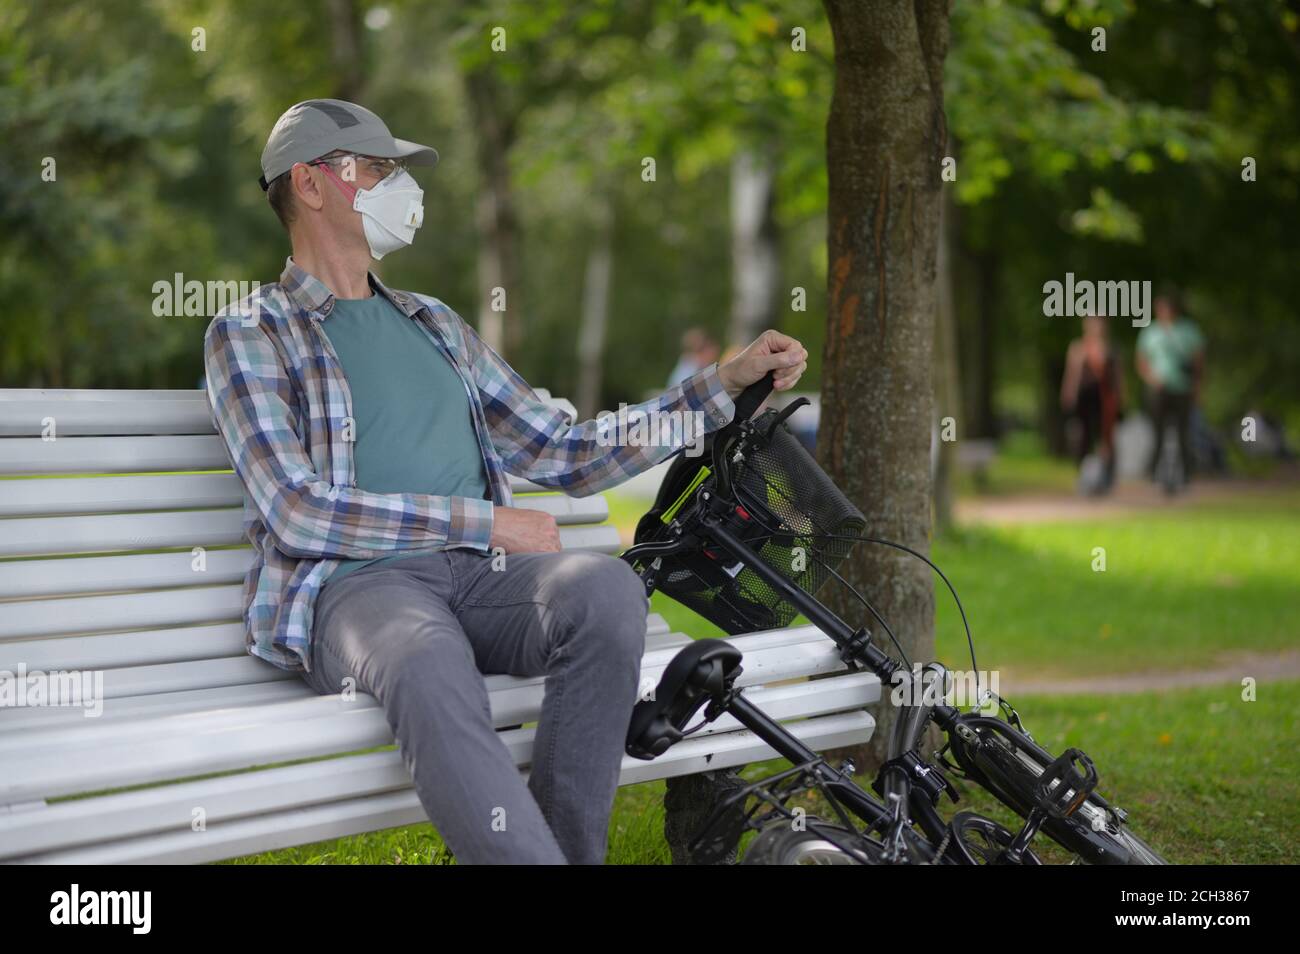 Mature Caucasian man in a respirator with his bicycle resting on a bench in a city park Stock Photo